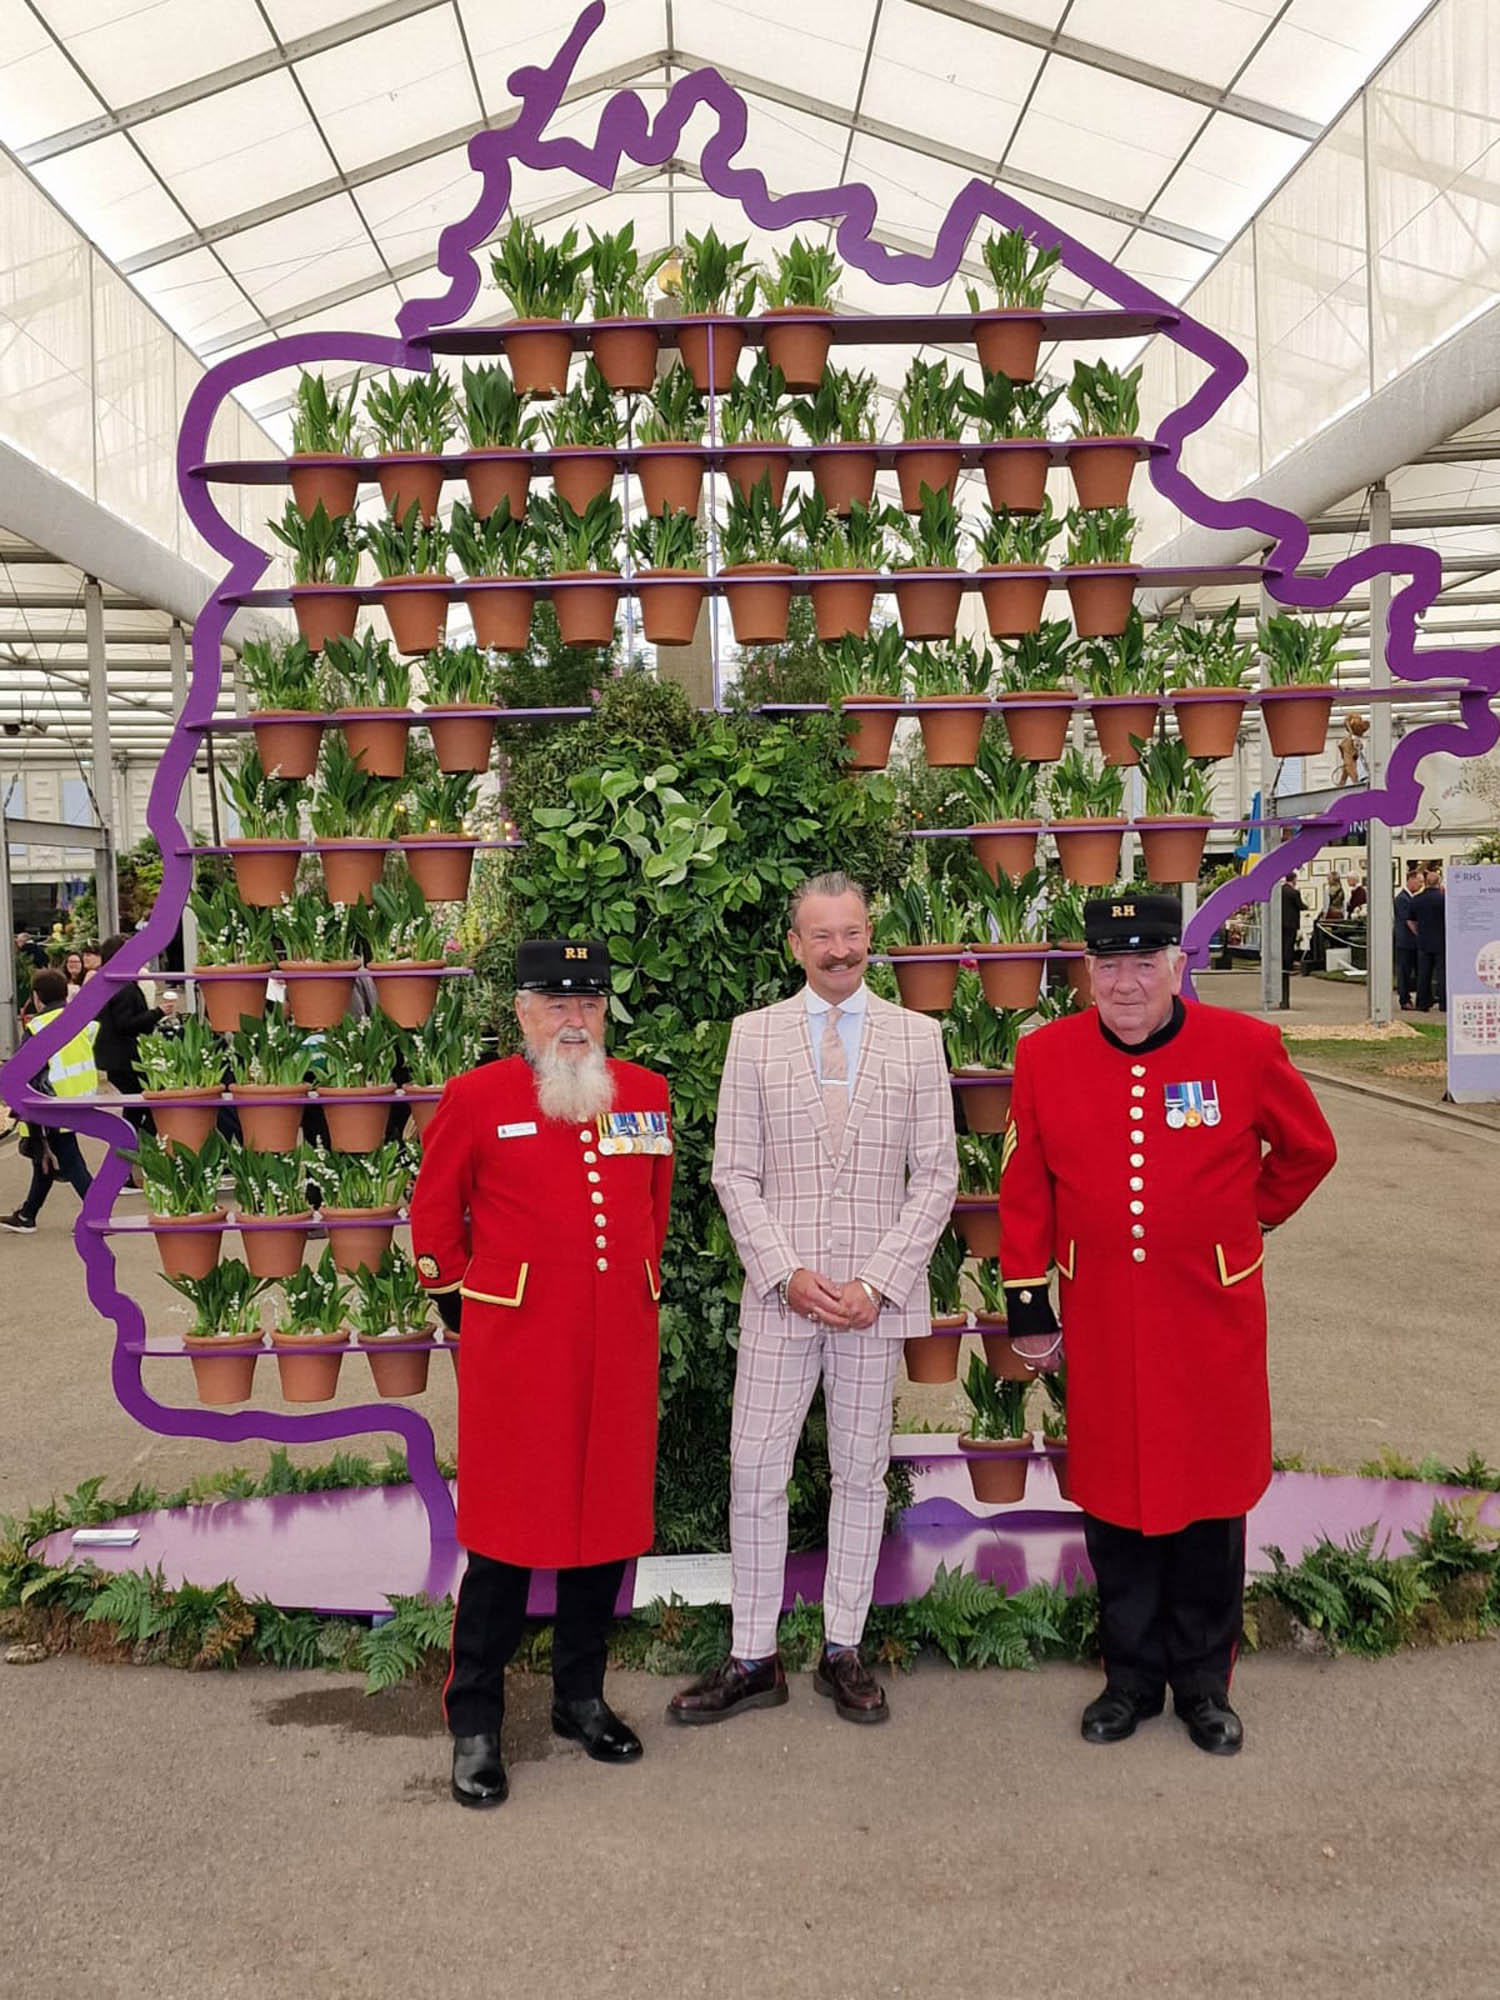 Chelsea pensioners in red uniform stand with Simon Lycett garden designer in front of his amazing 3D silhouette portrait of the Queen made from foliage and 70 pots of HRM favourite flower Lilly of the valley representing 70 years on the thrown as part of the jubilee celebrations in the gardens